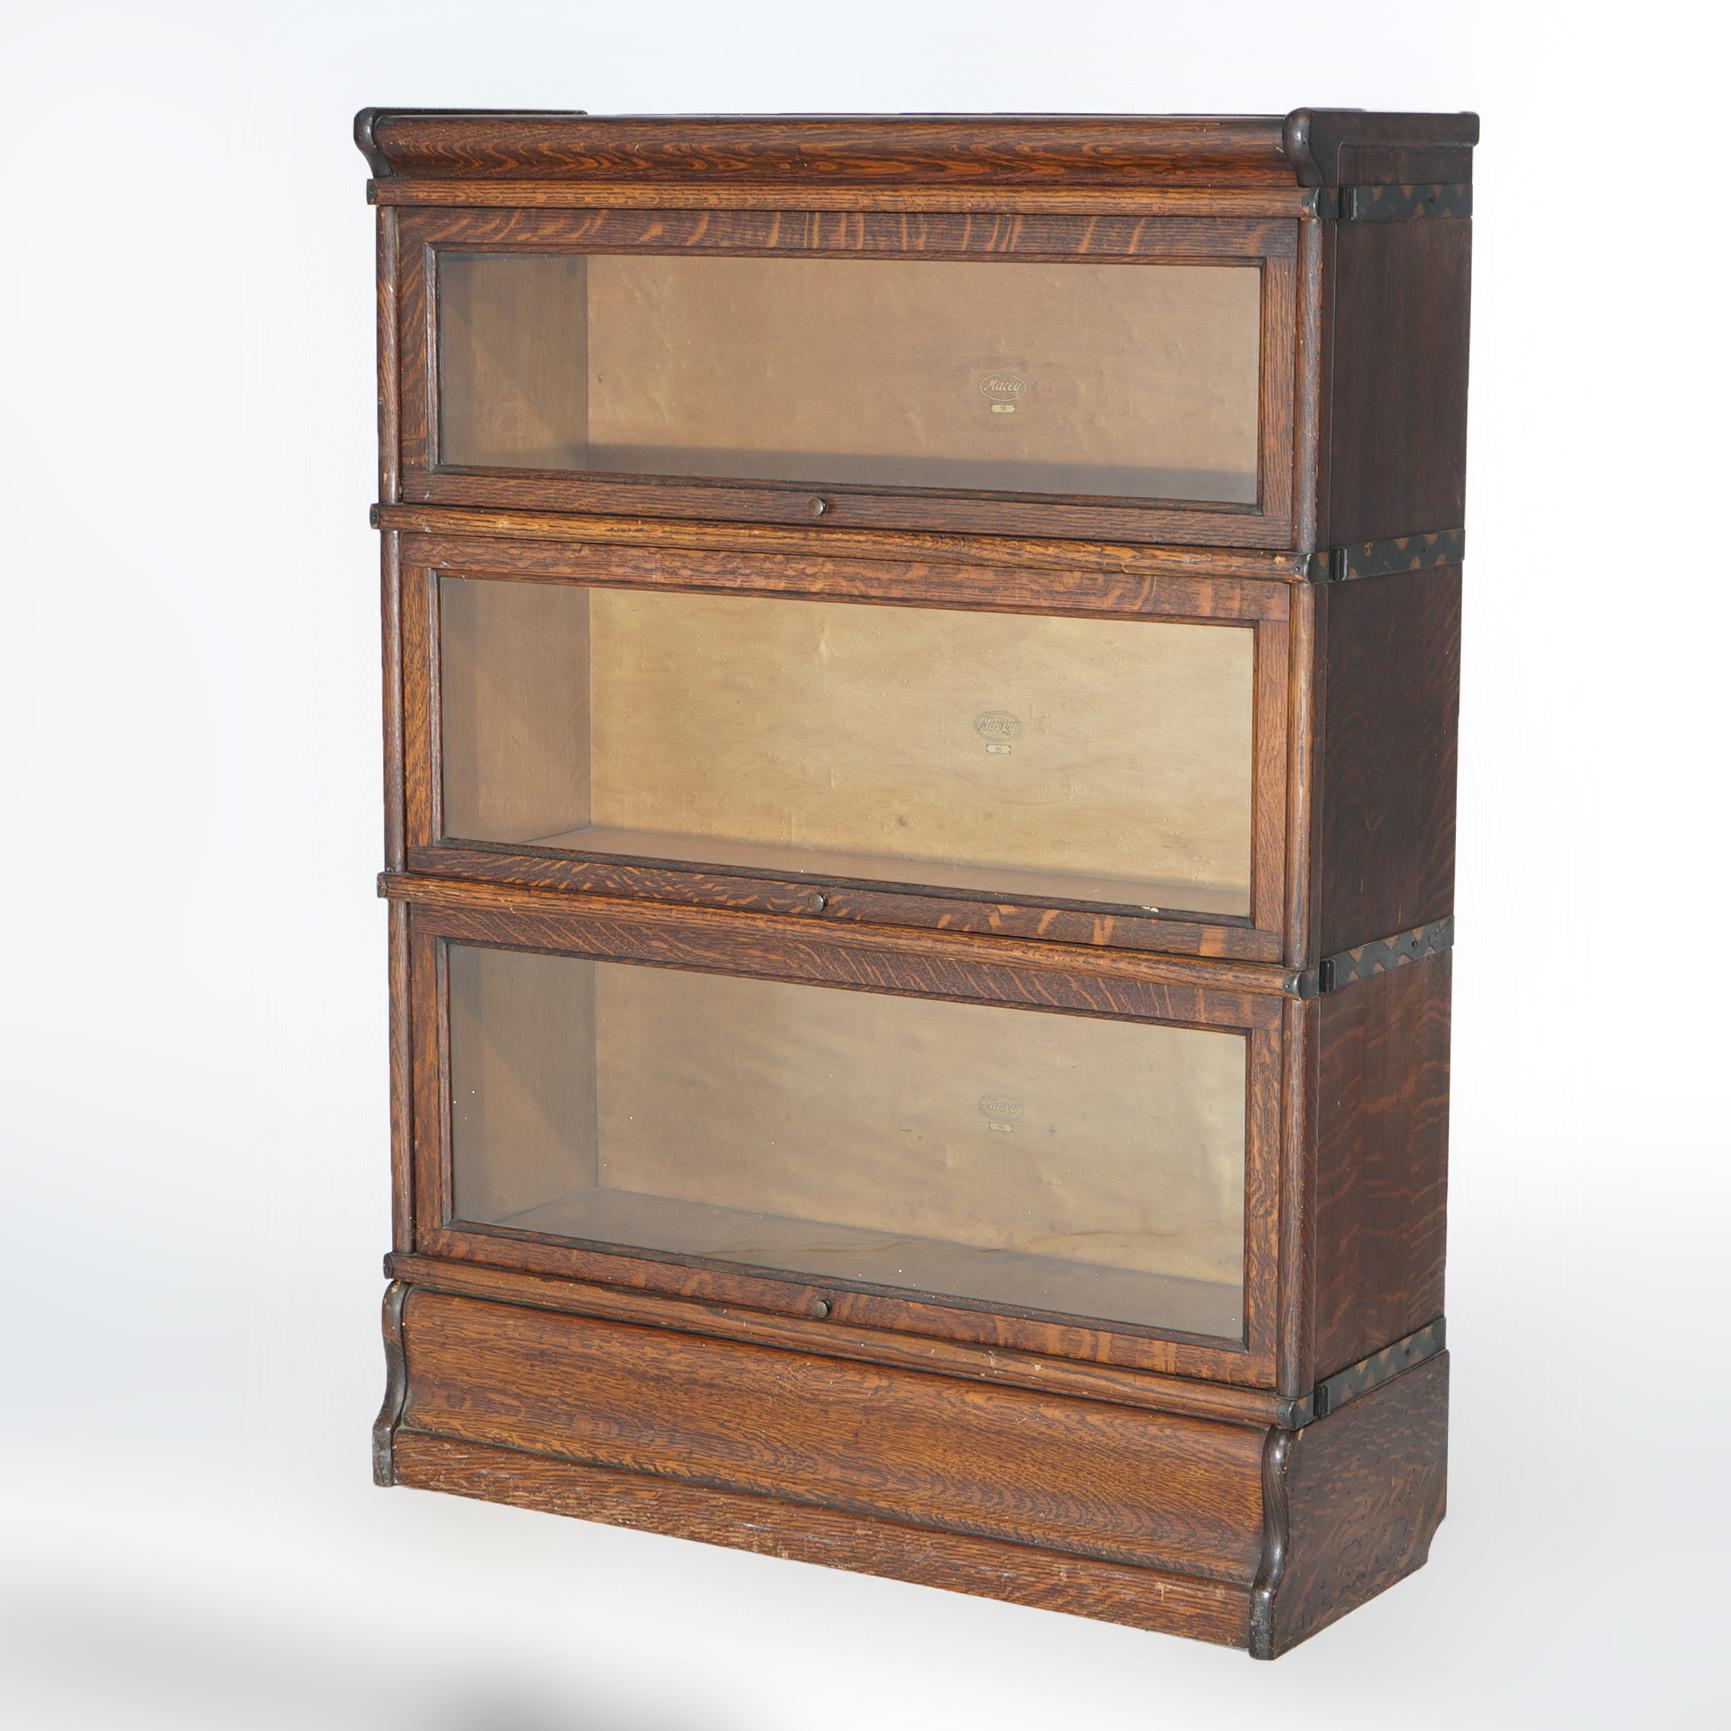 An antique  Arts and Crafts barrister bookcase by Macey offers quarter sawn oak construction with three stacks, each having pullout glass doors, and raised on ogee base, c1910

Measures - 46